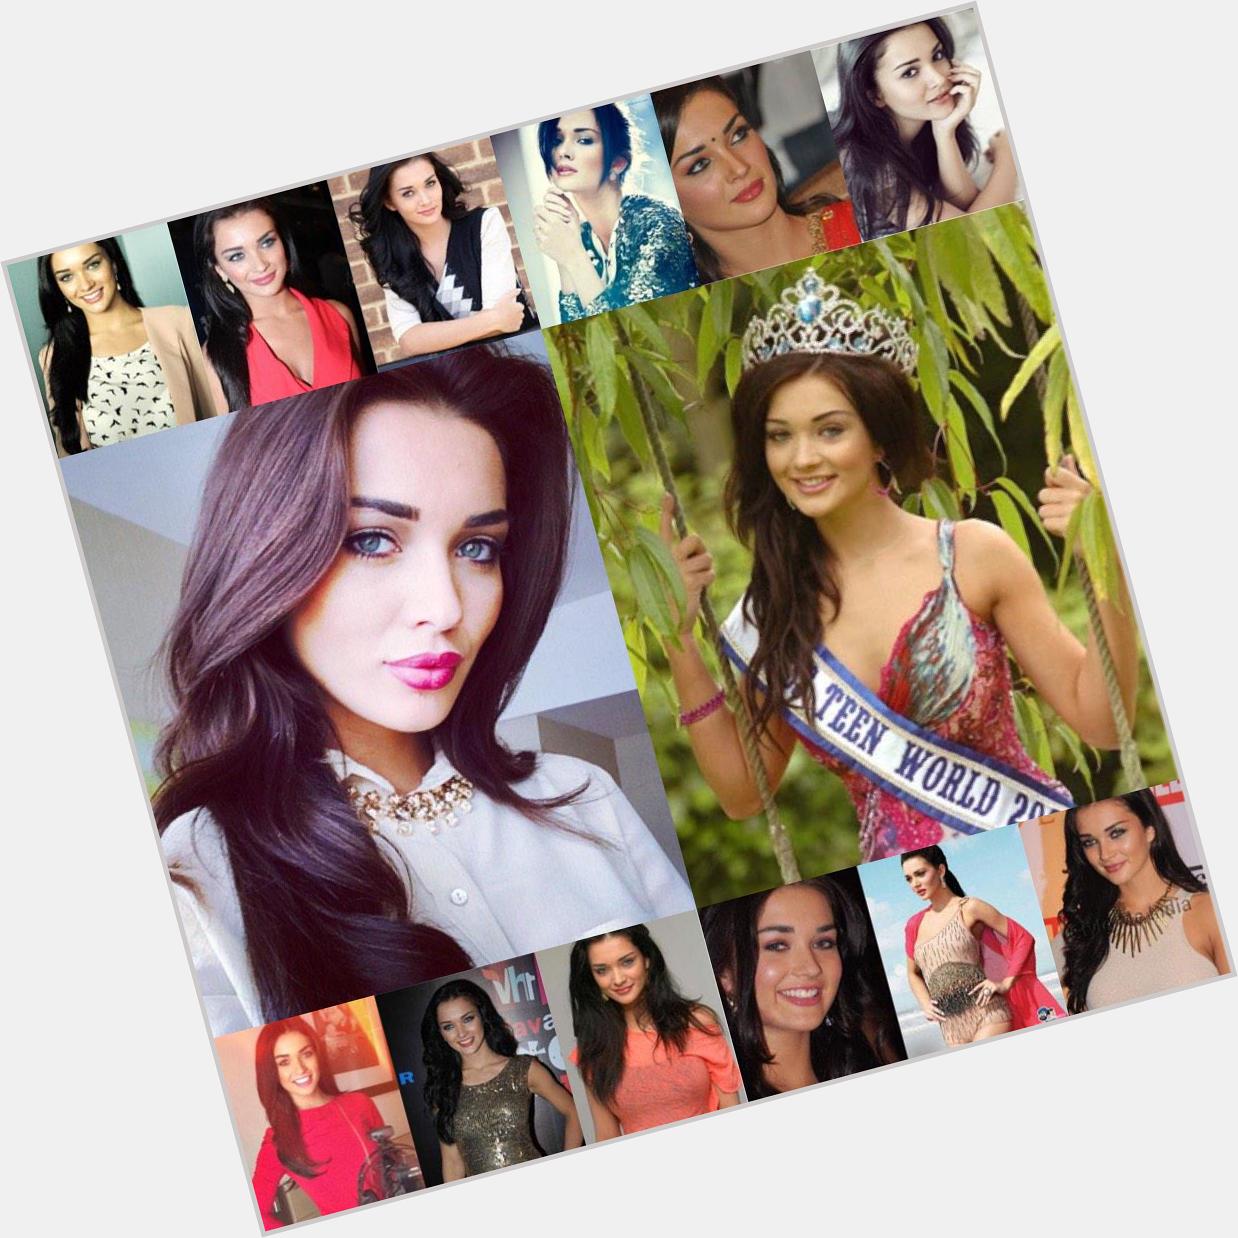 HapPY bIrtHdAY to the cute,awesome,beautiful amy Jackson this pic and the video was made for u by me 